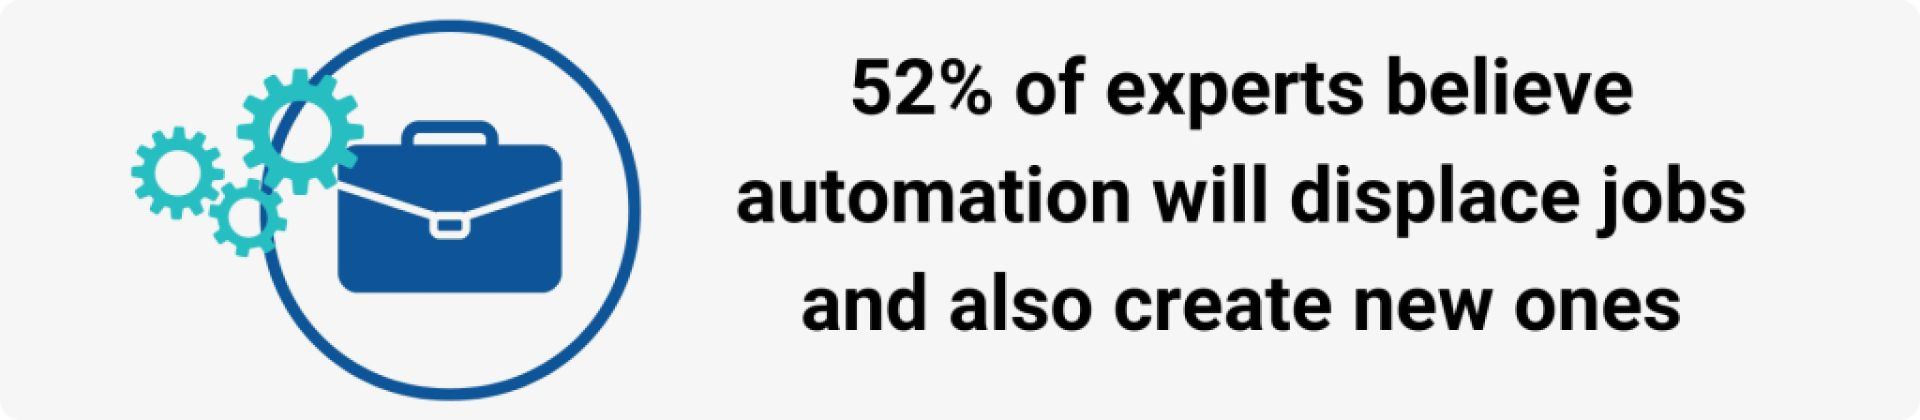 52% of experts believe automation will displace jobs and also create new ones